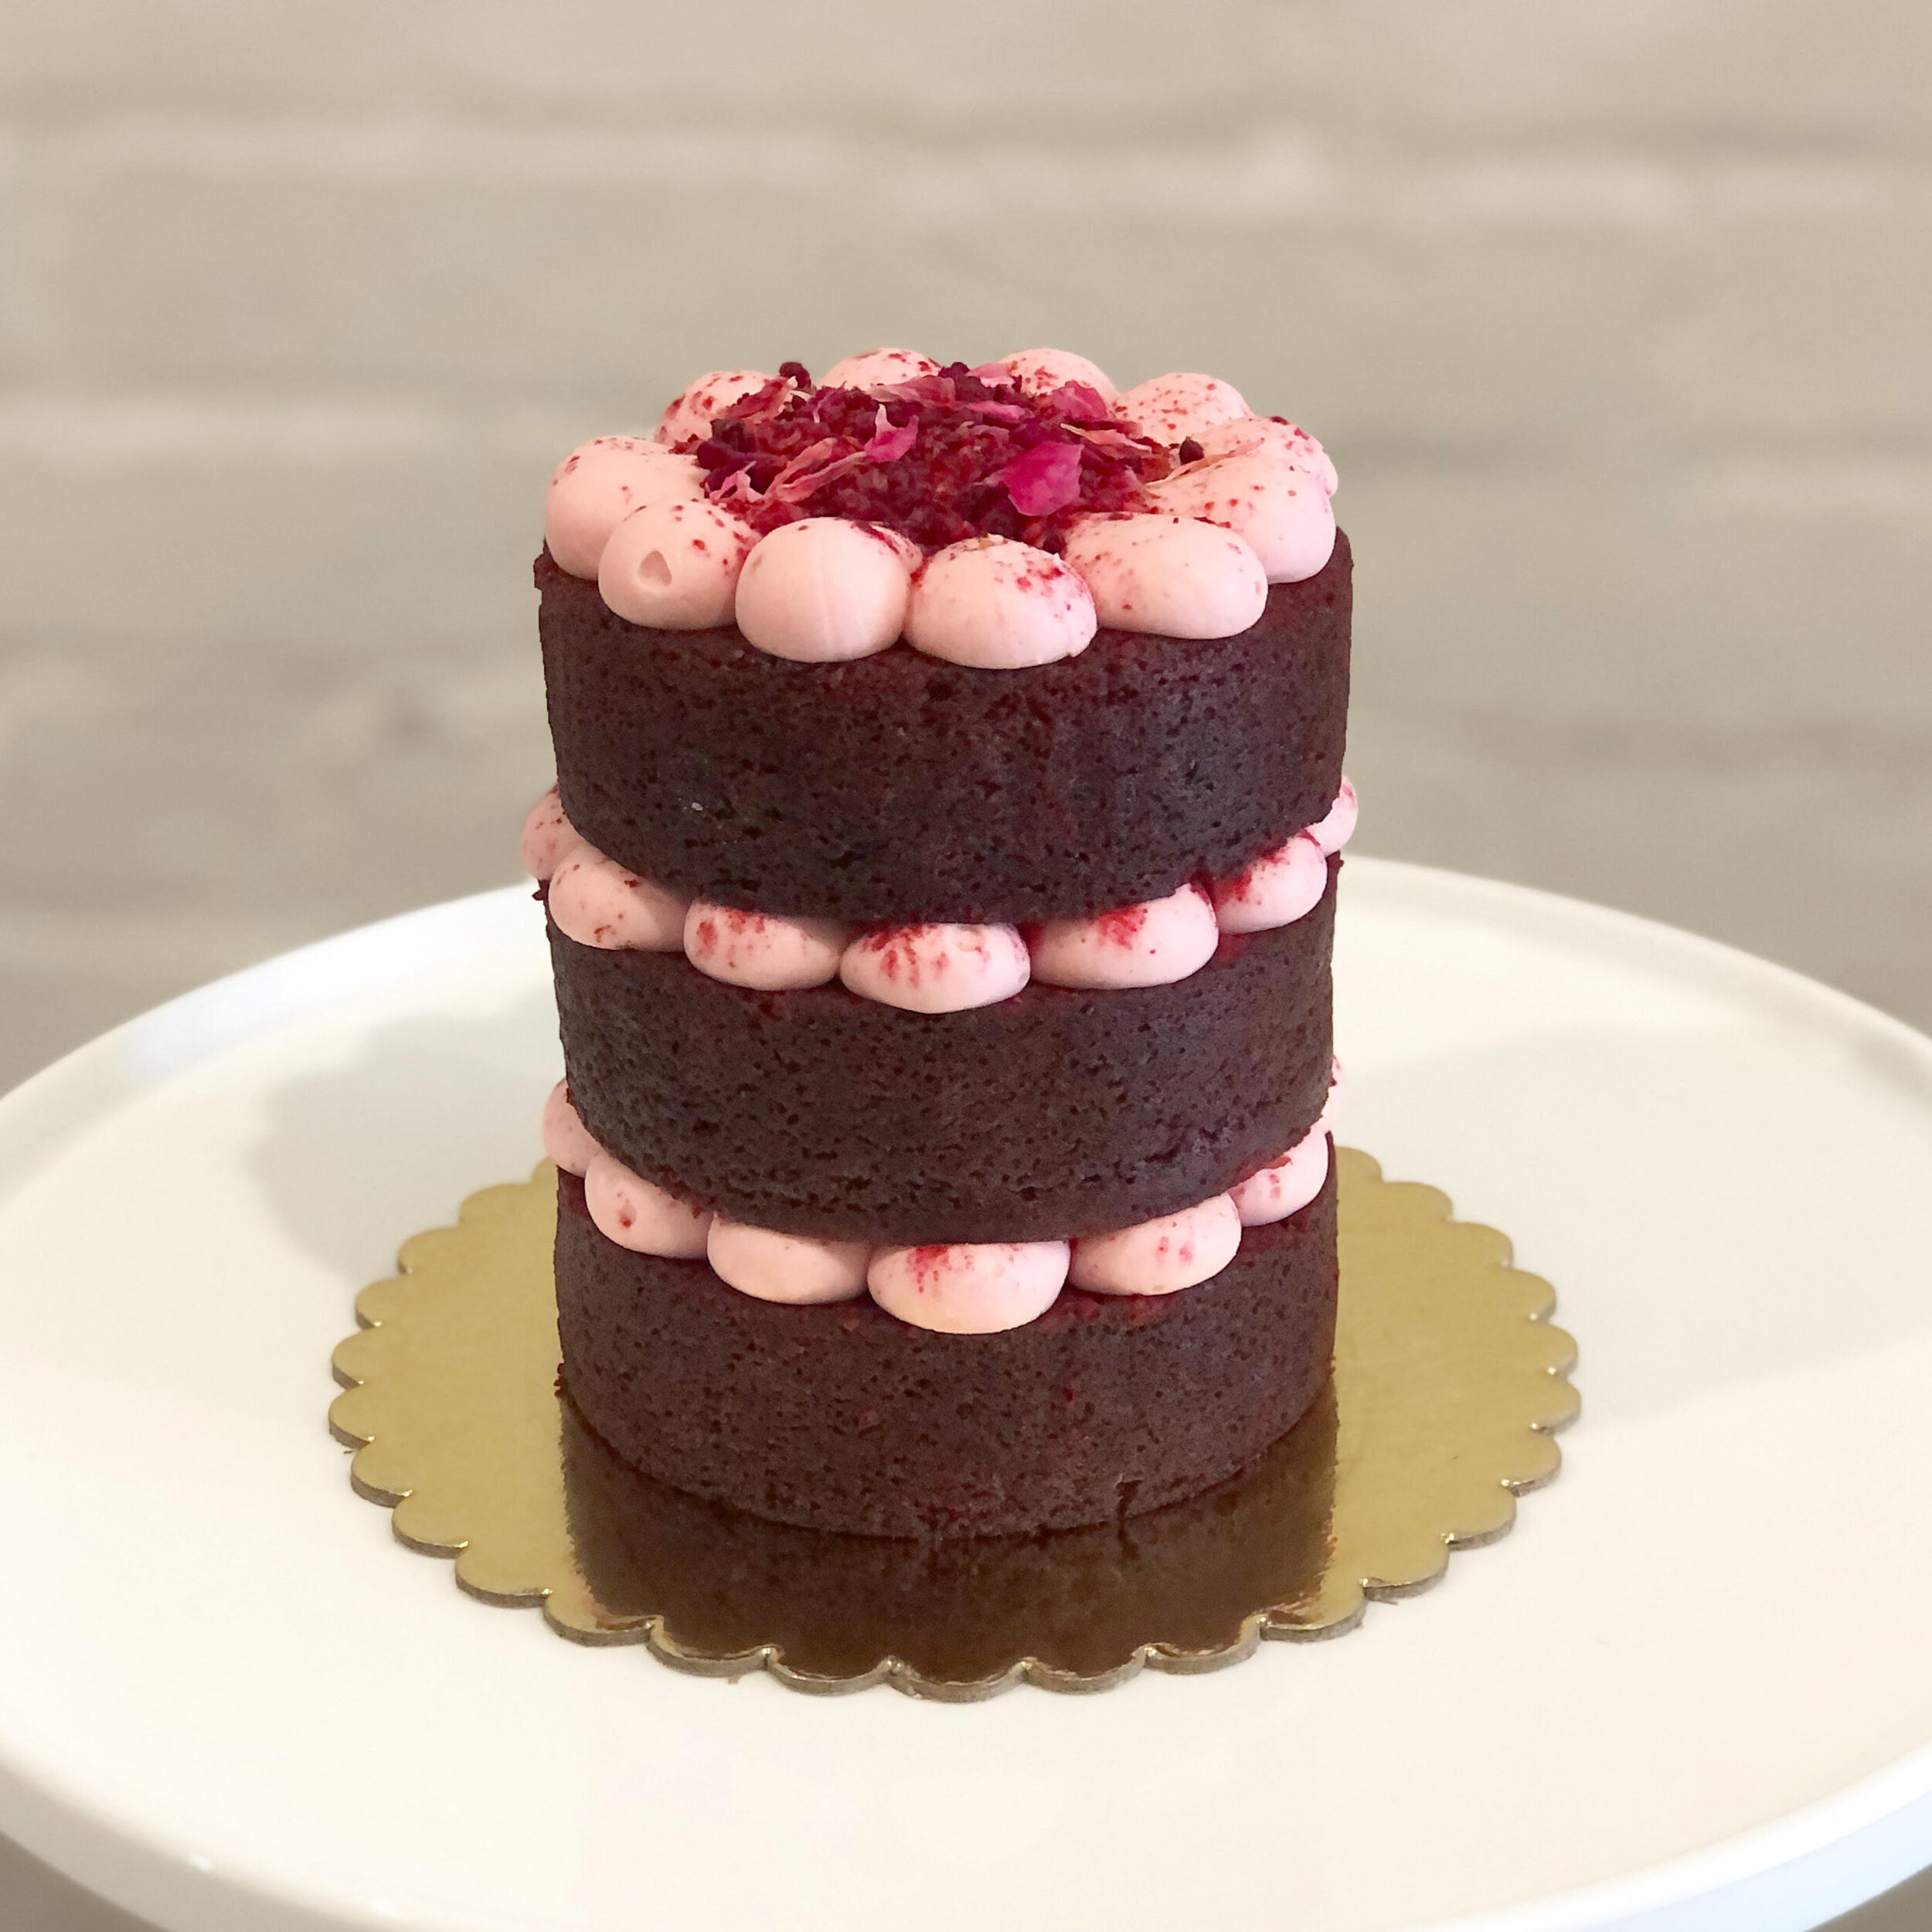 PREORDER** Cake 33: Pink W/ Strawberry Cake {Min. 72-48 Hrs. Notice} –  Delicious MV & Vineyard Grocer